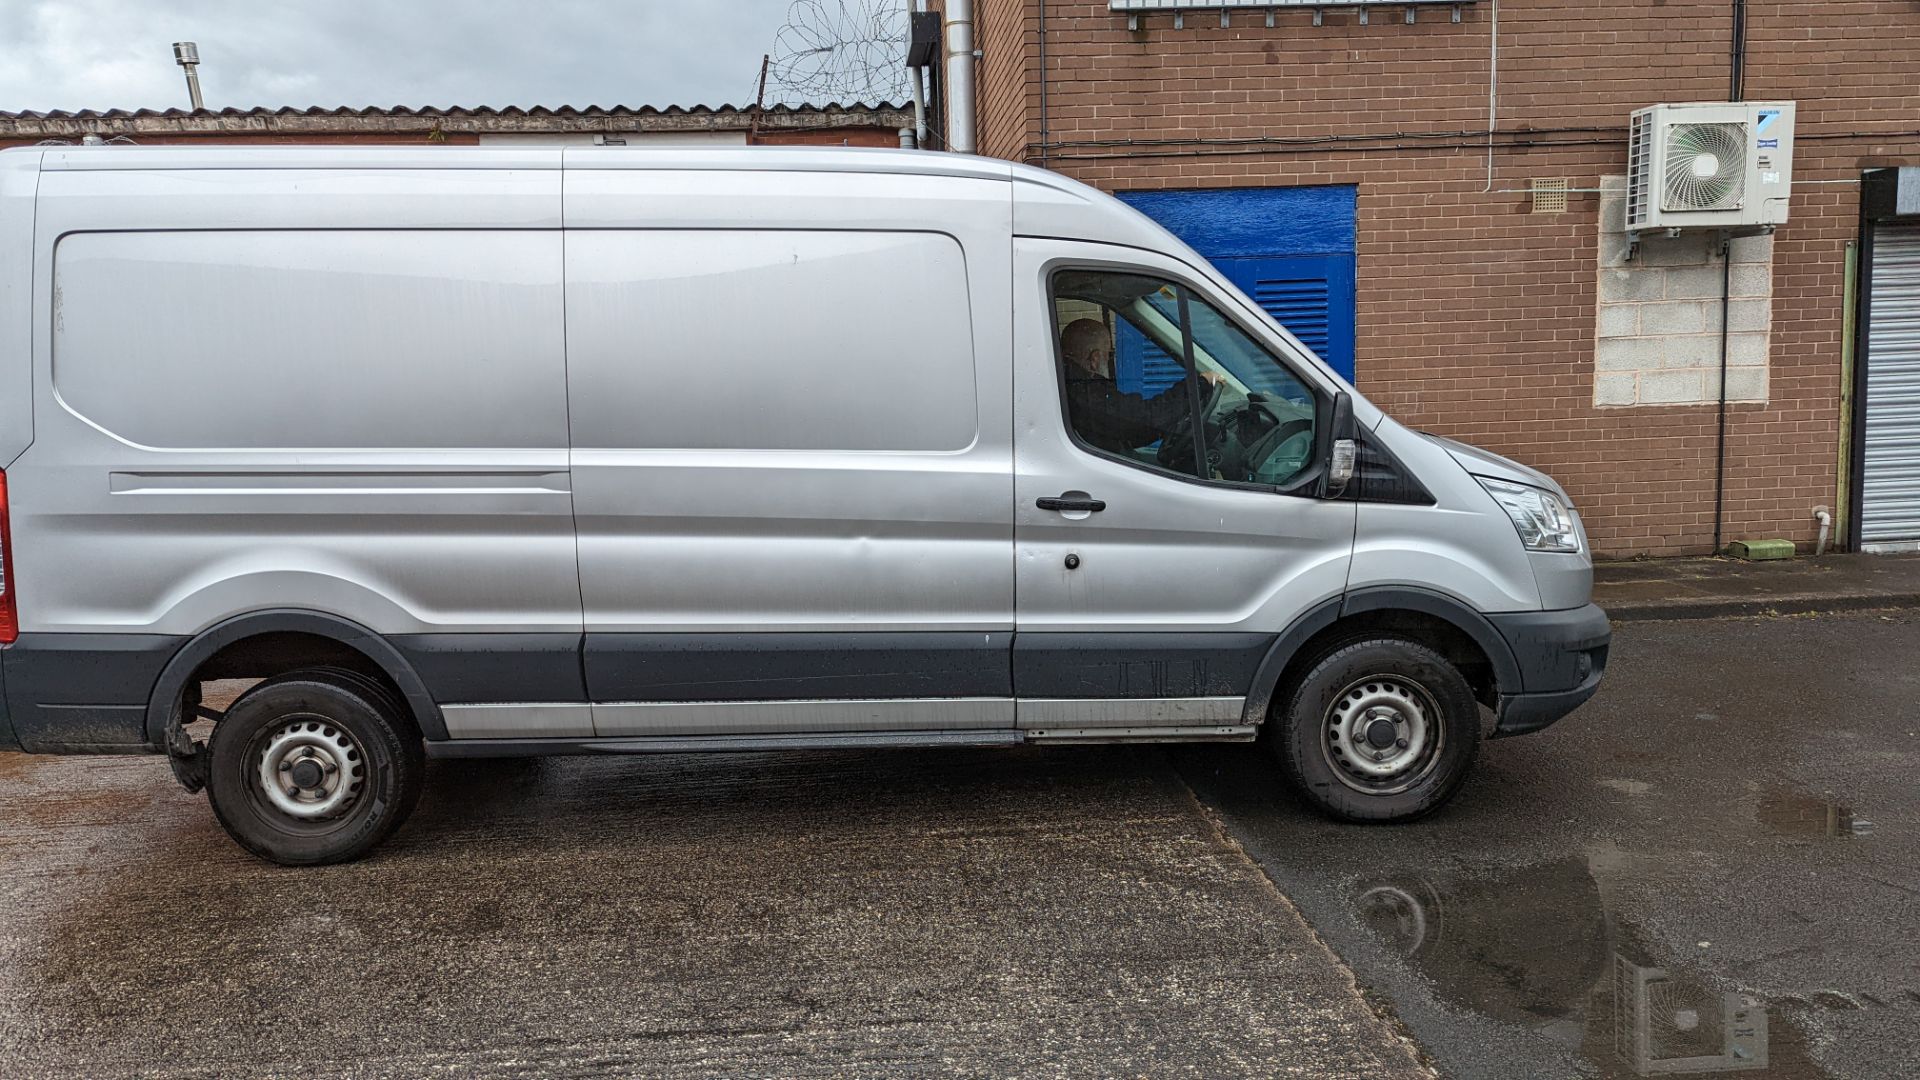 MD65 WHH Ford Transit 350, 6-speed manual gearbox, 2198cc diesel engine, 5981mm x 2550mm. Colour: Si - Image 28 of 51